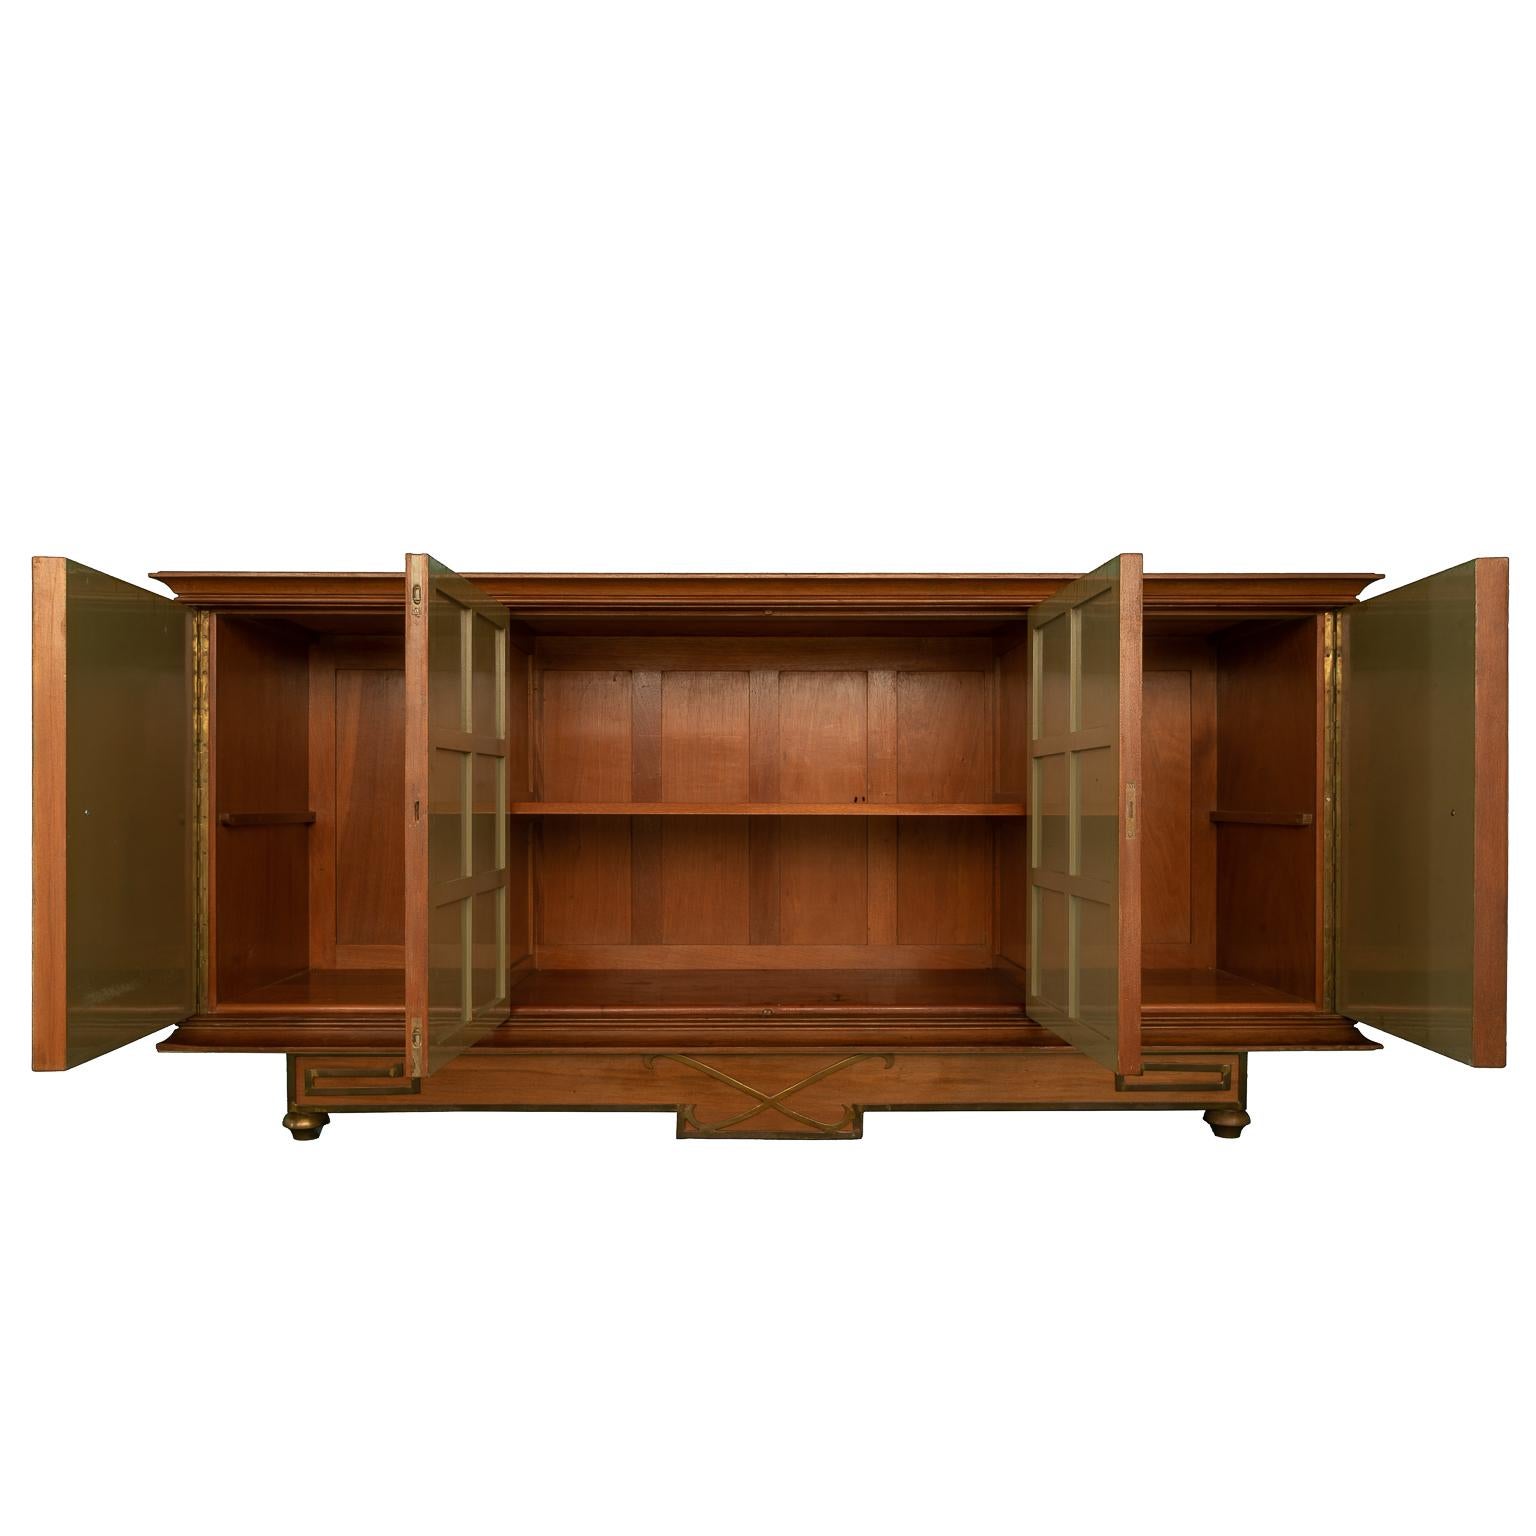 buffet cabinet, with golden doors and drawings of centaurs, Made of red cedar wood, it has surfaces with bronze. It is a Minimalist design of the 1950s.